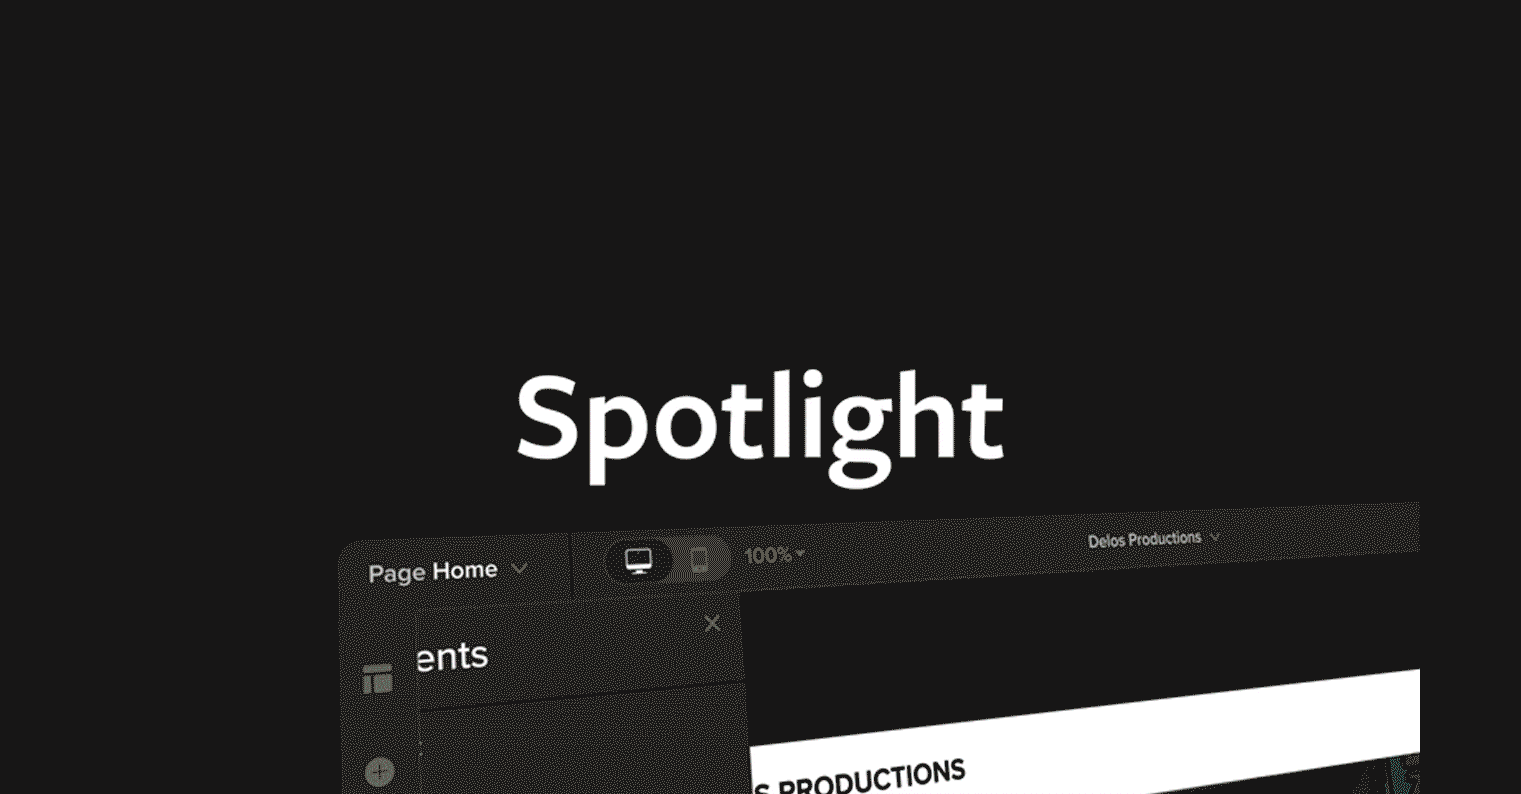 GIF demonstrating Spotlight's Playlist features.